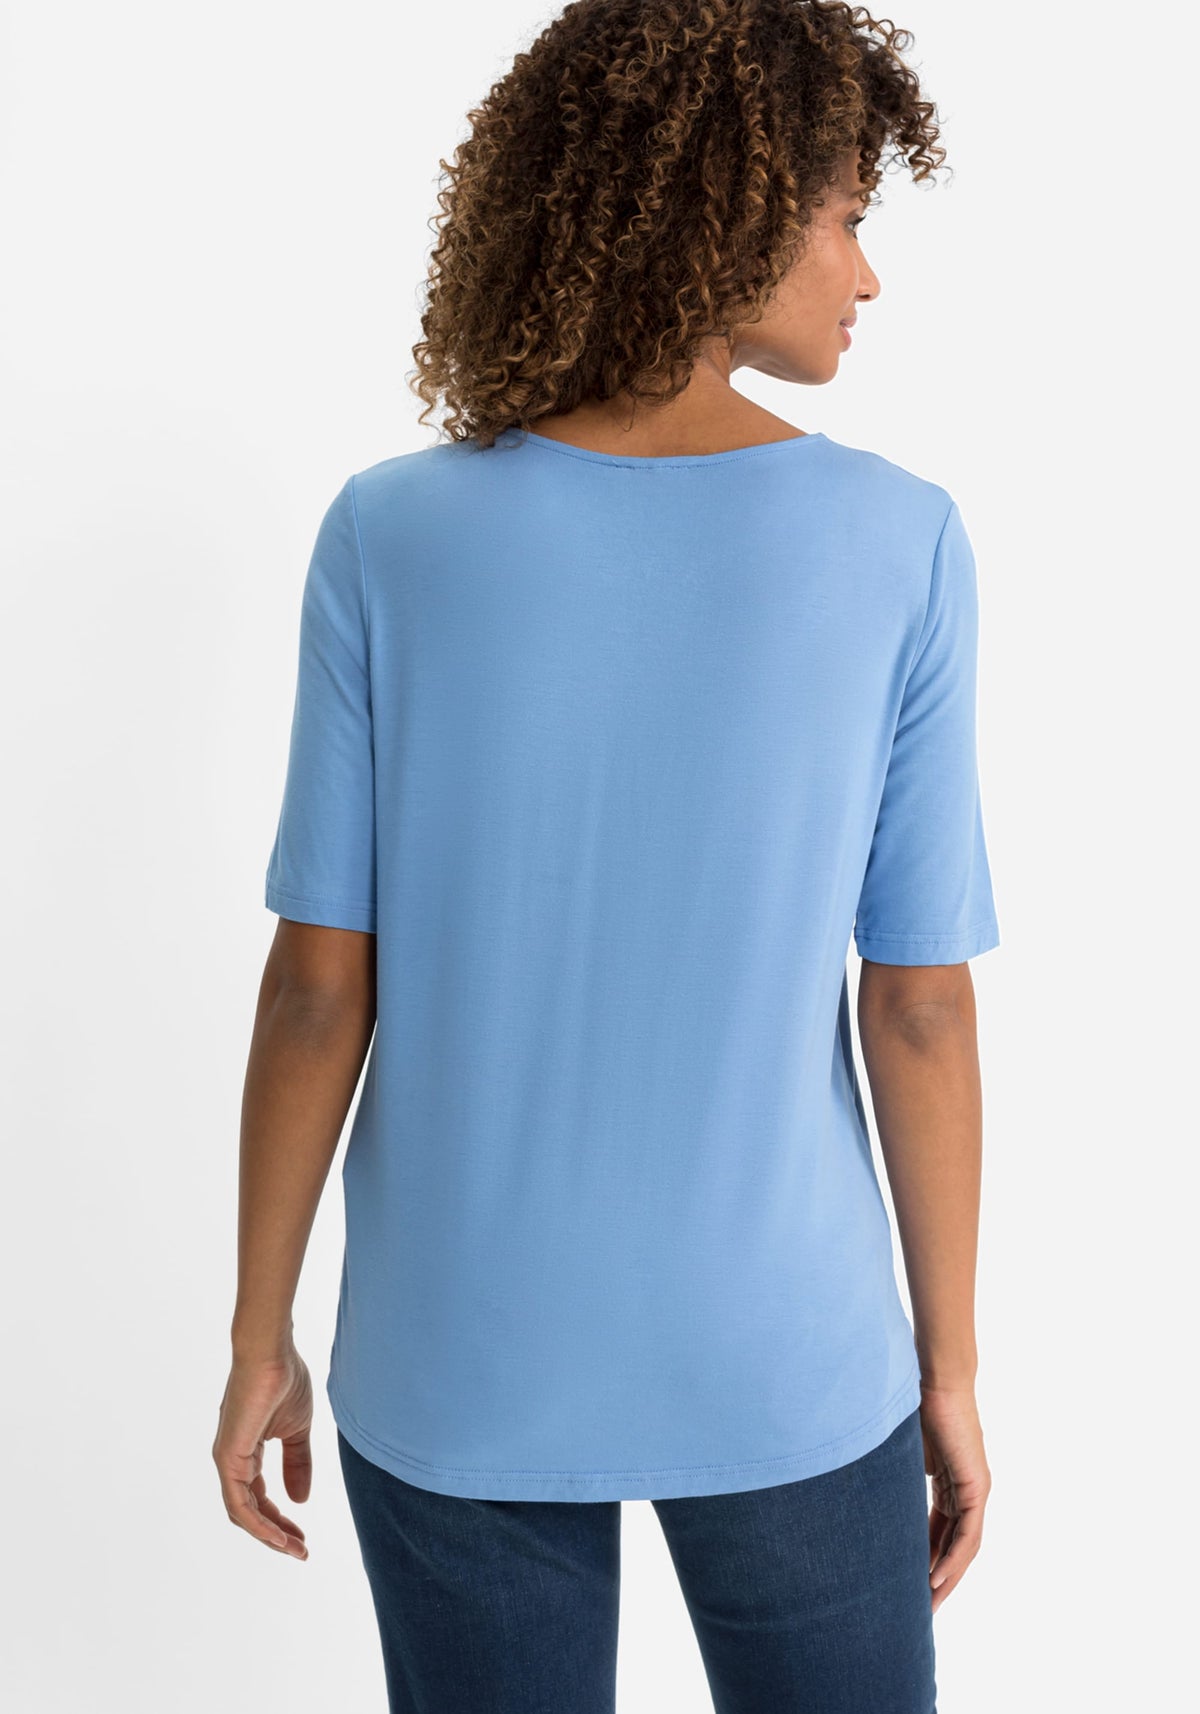 Short Sleeve Solid Tee with Keyhole Neckline